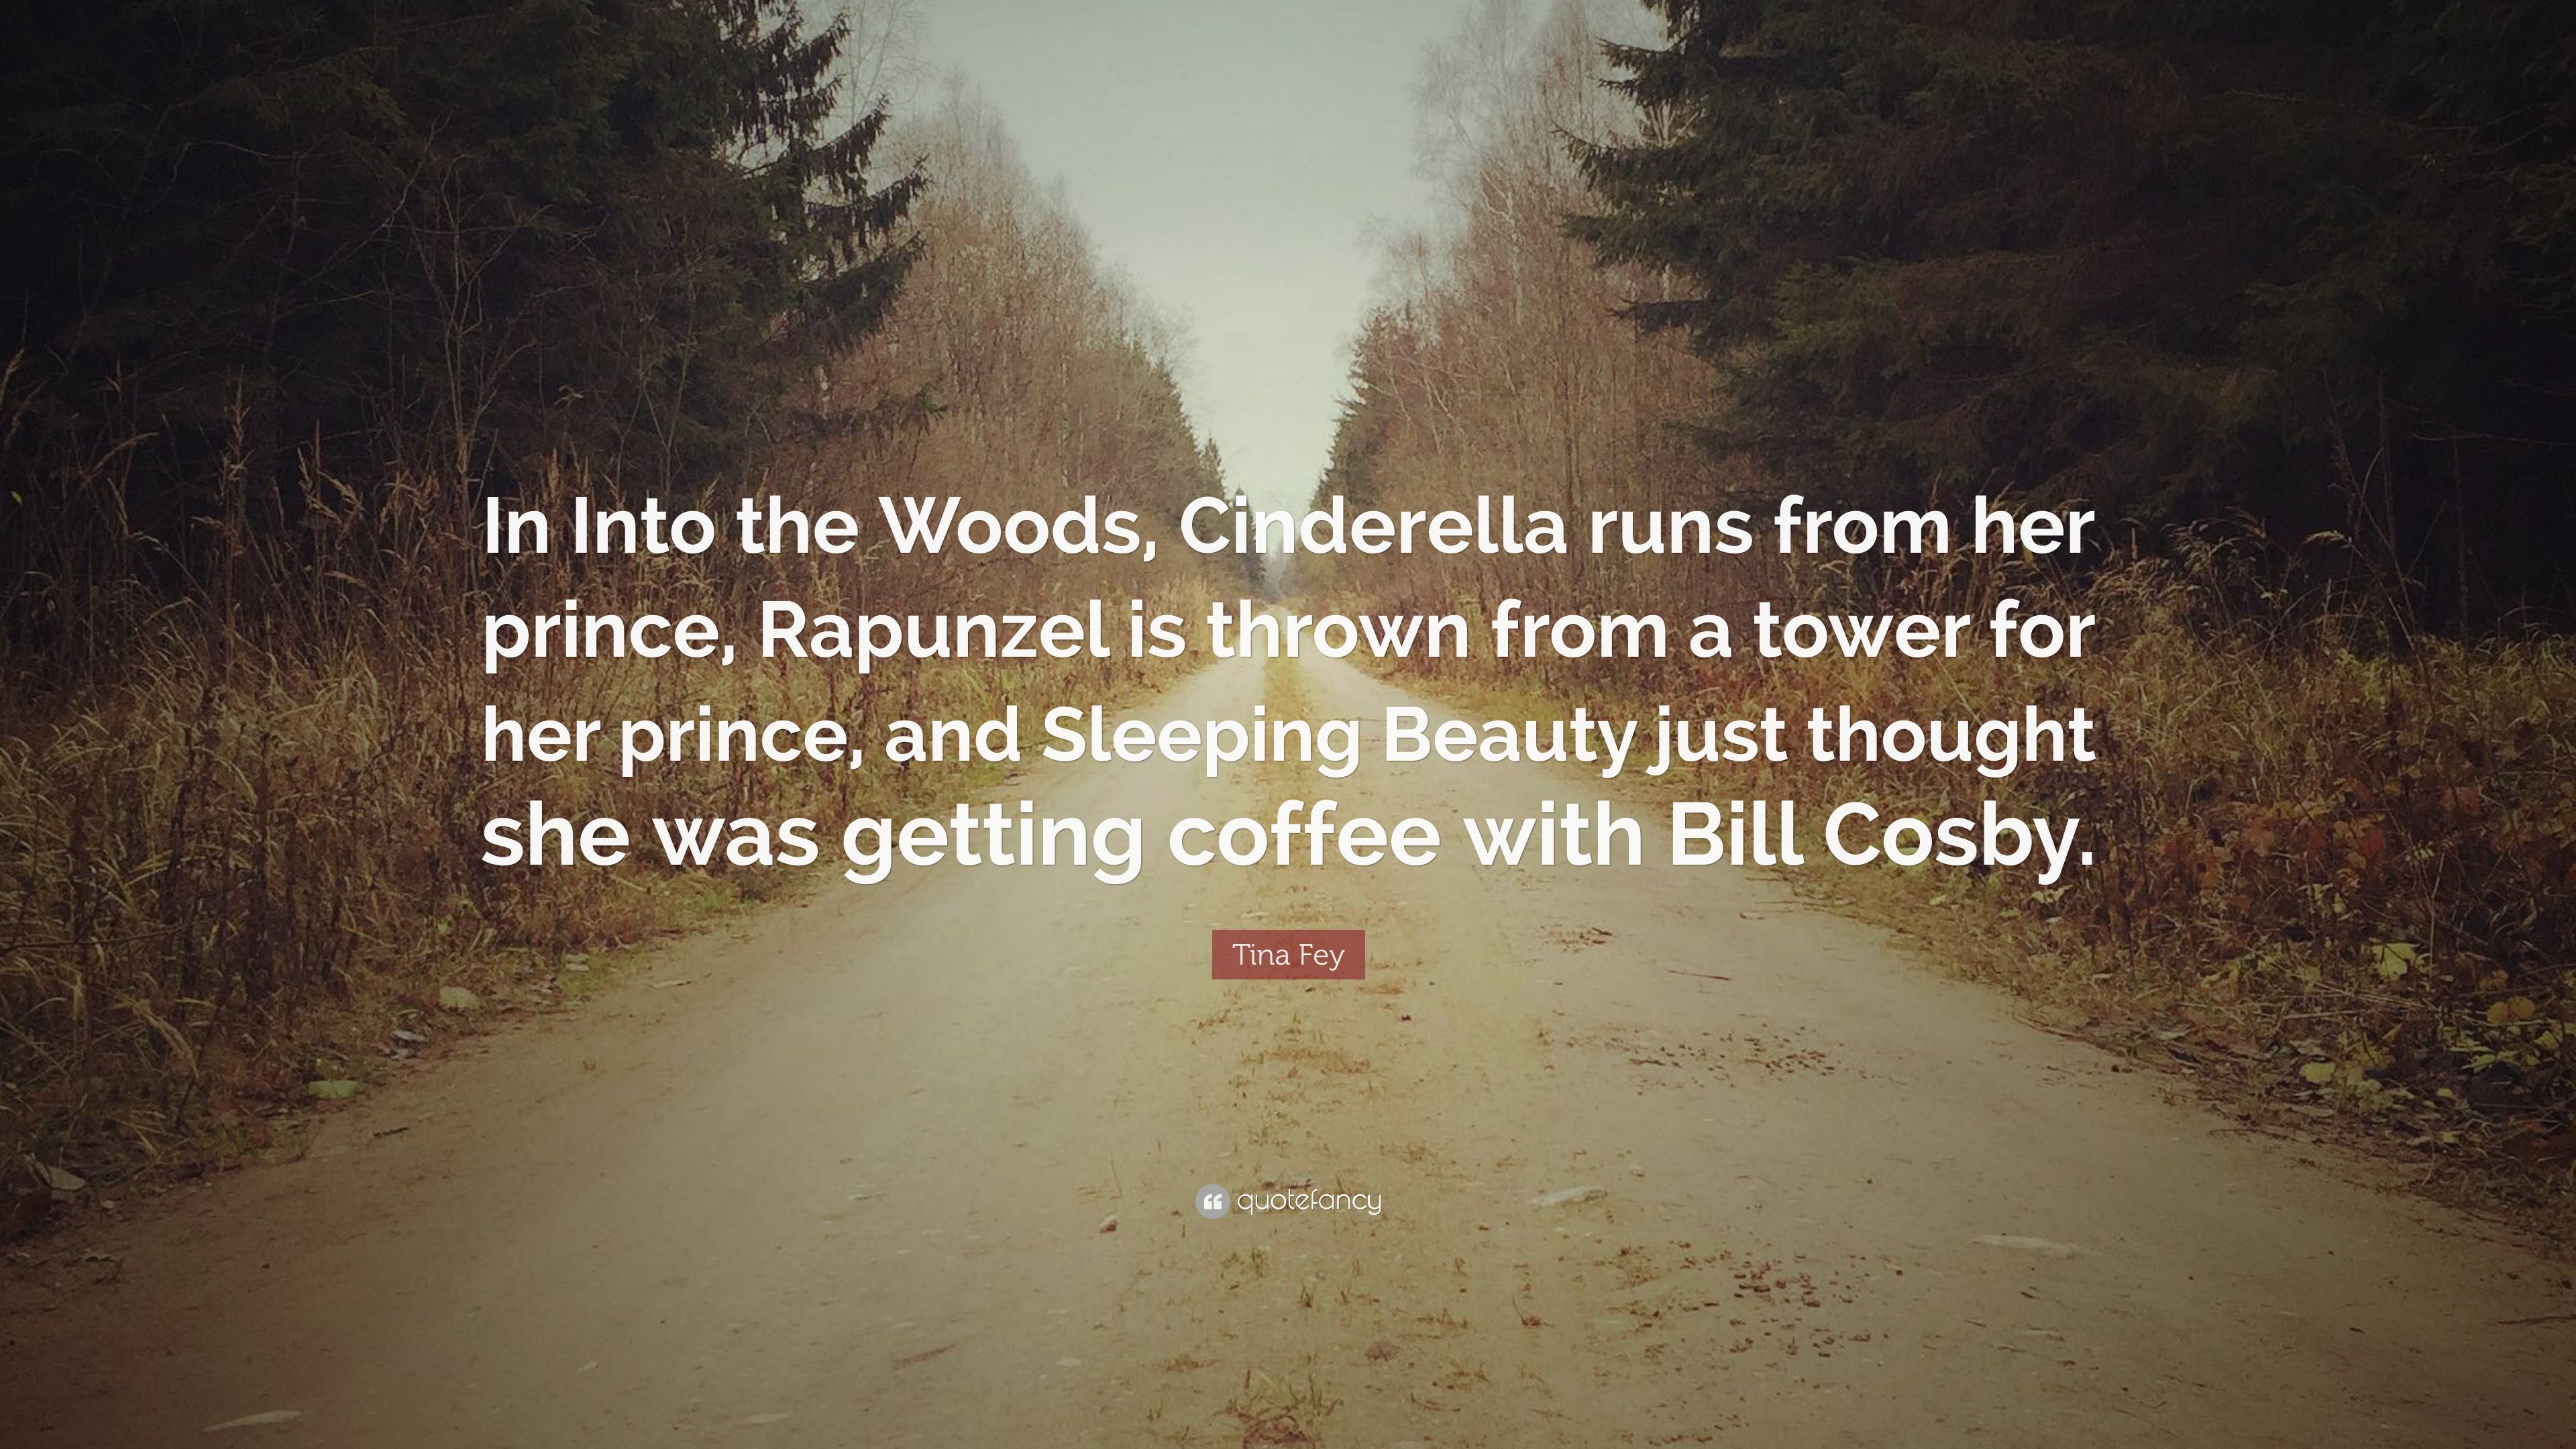 Tina Fey Quote: “In Into the Woods, Cinderella runs from her